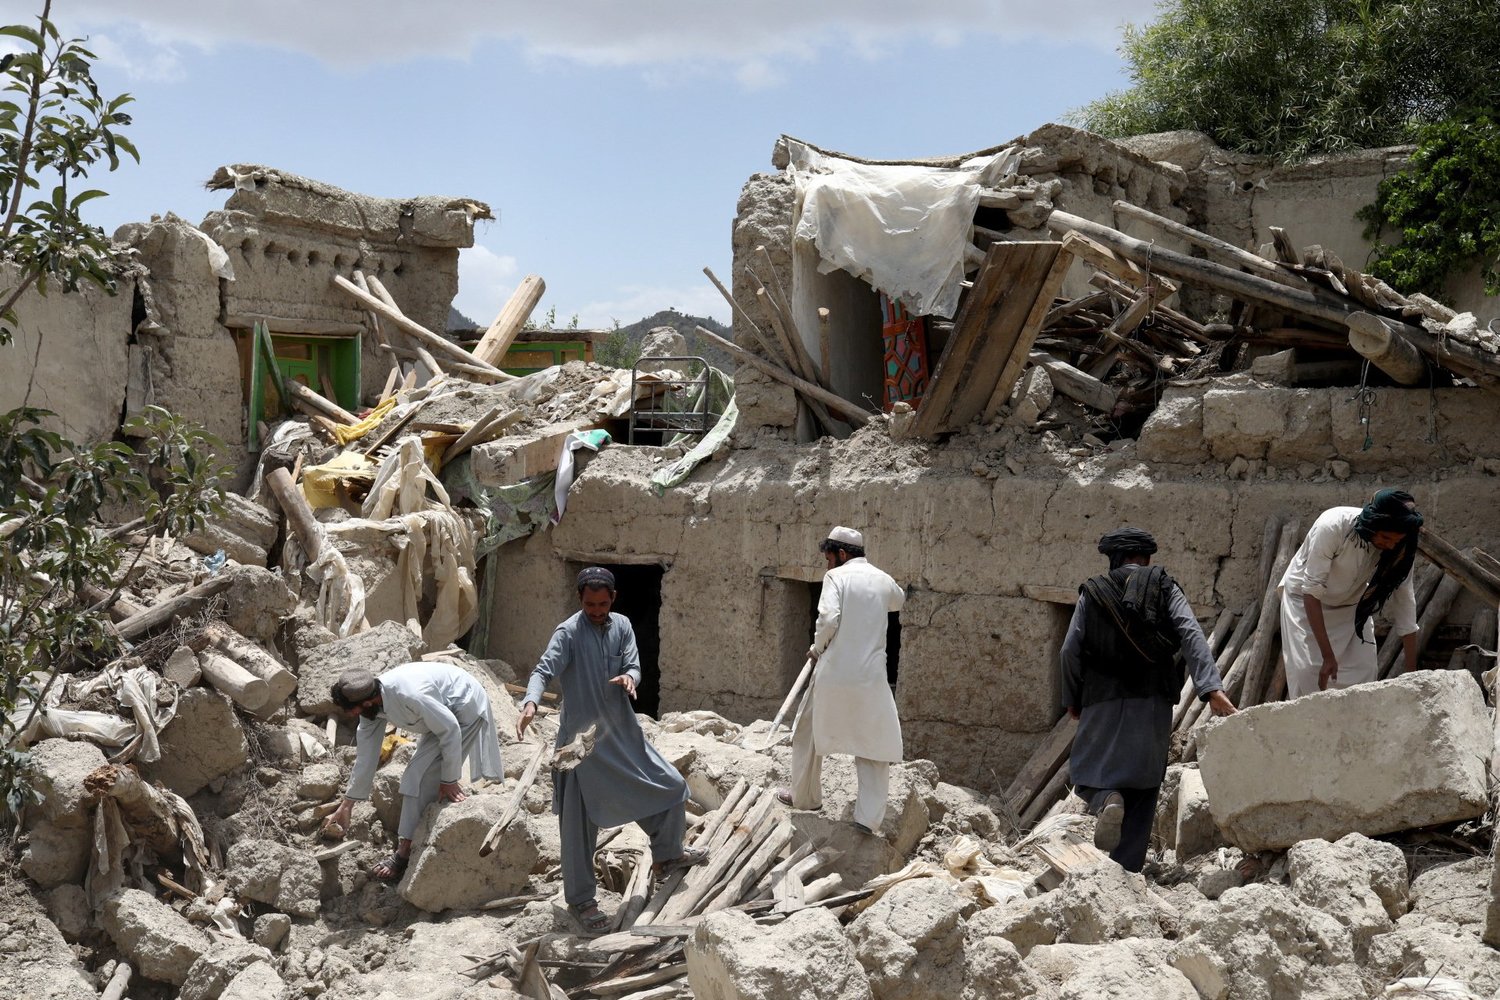 Afghan men search for survivors amid the debris of a destroyed house June 23 following an earthquake the previous day in Gayan, Afghanistan. During his June 22 general audience, Pope Francis offered prayers for victims of the magnitude 6 earthquake that hit a remote, mountainous area of Afghanistan near the border with Pakistan.